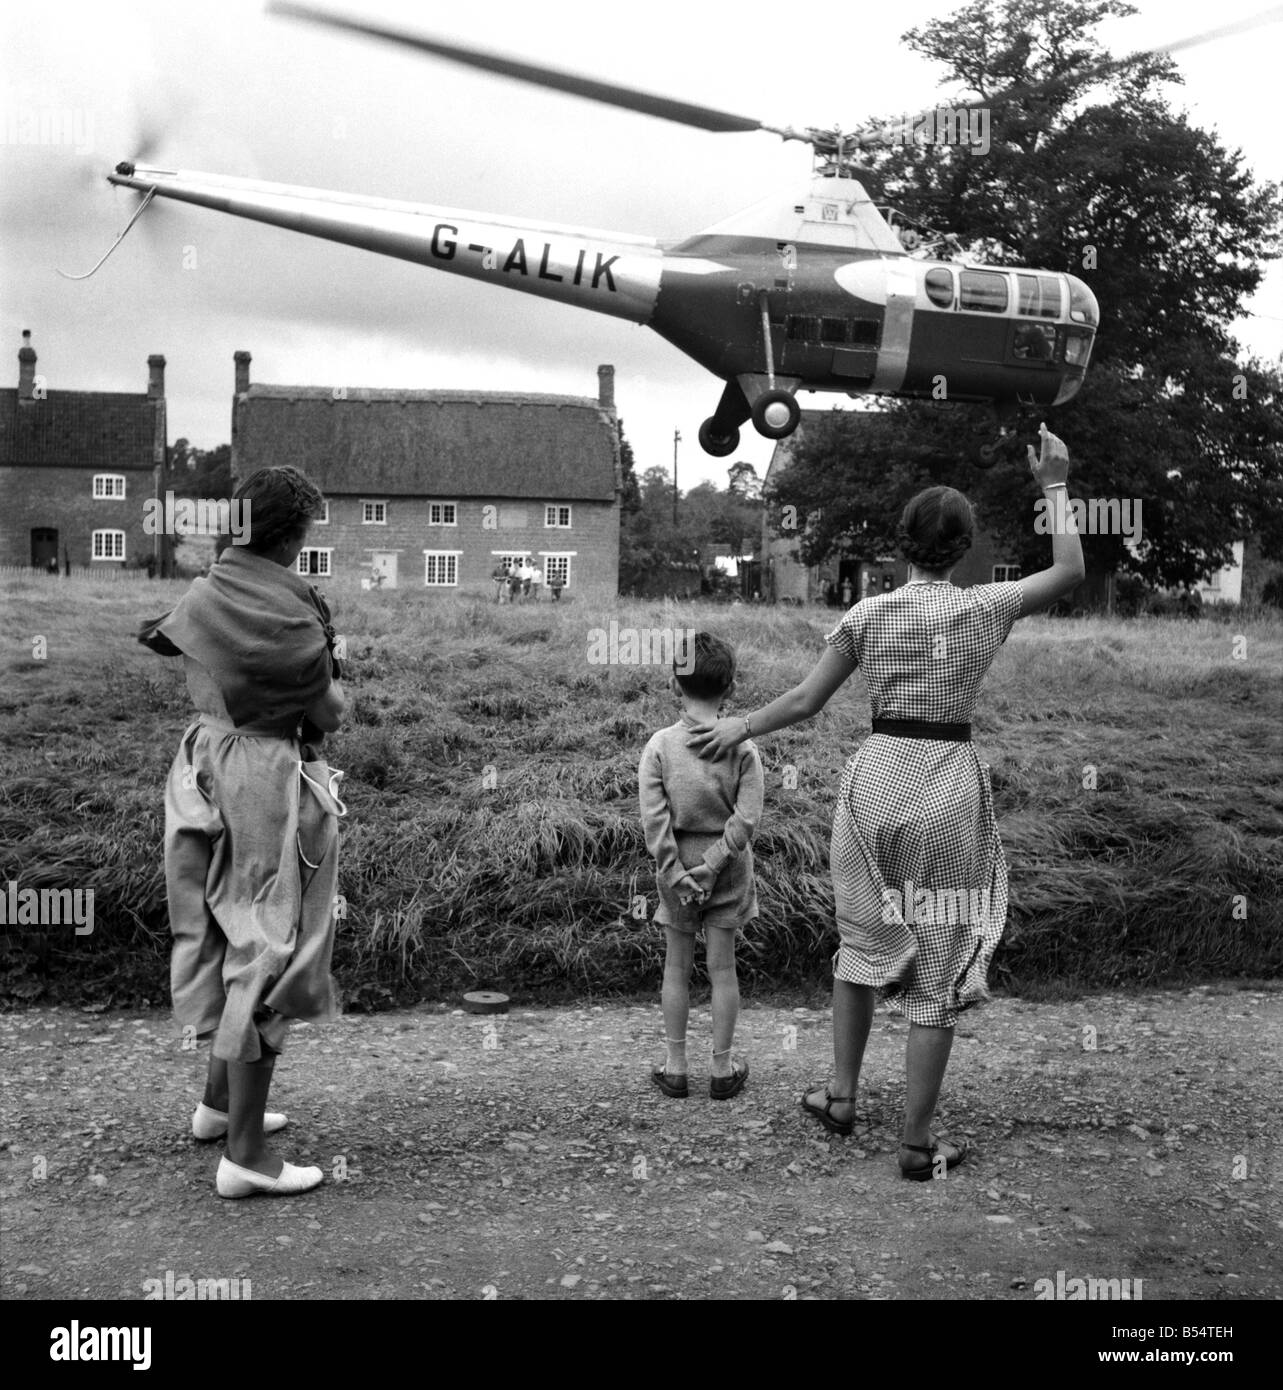 Westland Helicopters at Yeovil in Somerset built the Westland- Sikorsky W.S.51 under licence from the American company Sikorsky. ;It was one of the more successful early helicopters. ;When production ceased in 1953 around 139 had been built. ;Picture landing on the village green at Nether Compton in Devon, being greeted by the local children August 1969.;D5309 Stock Photo